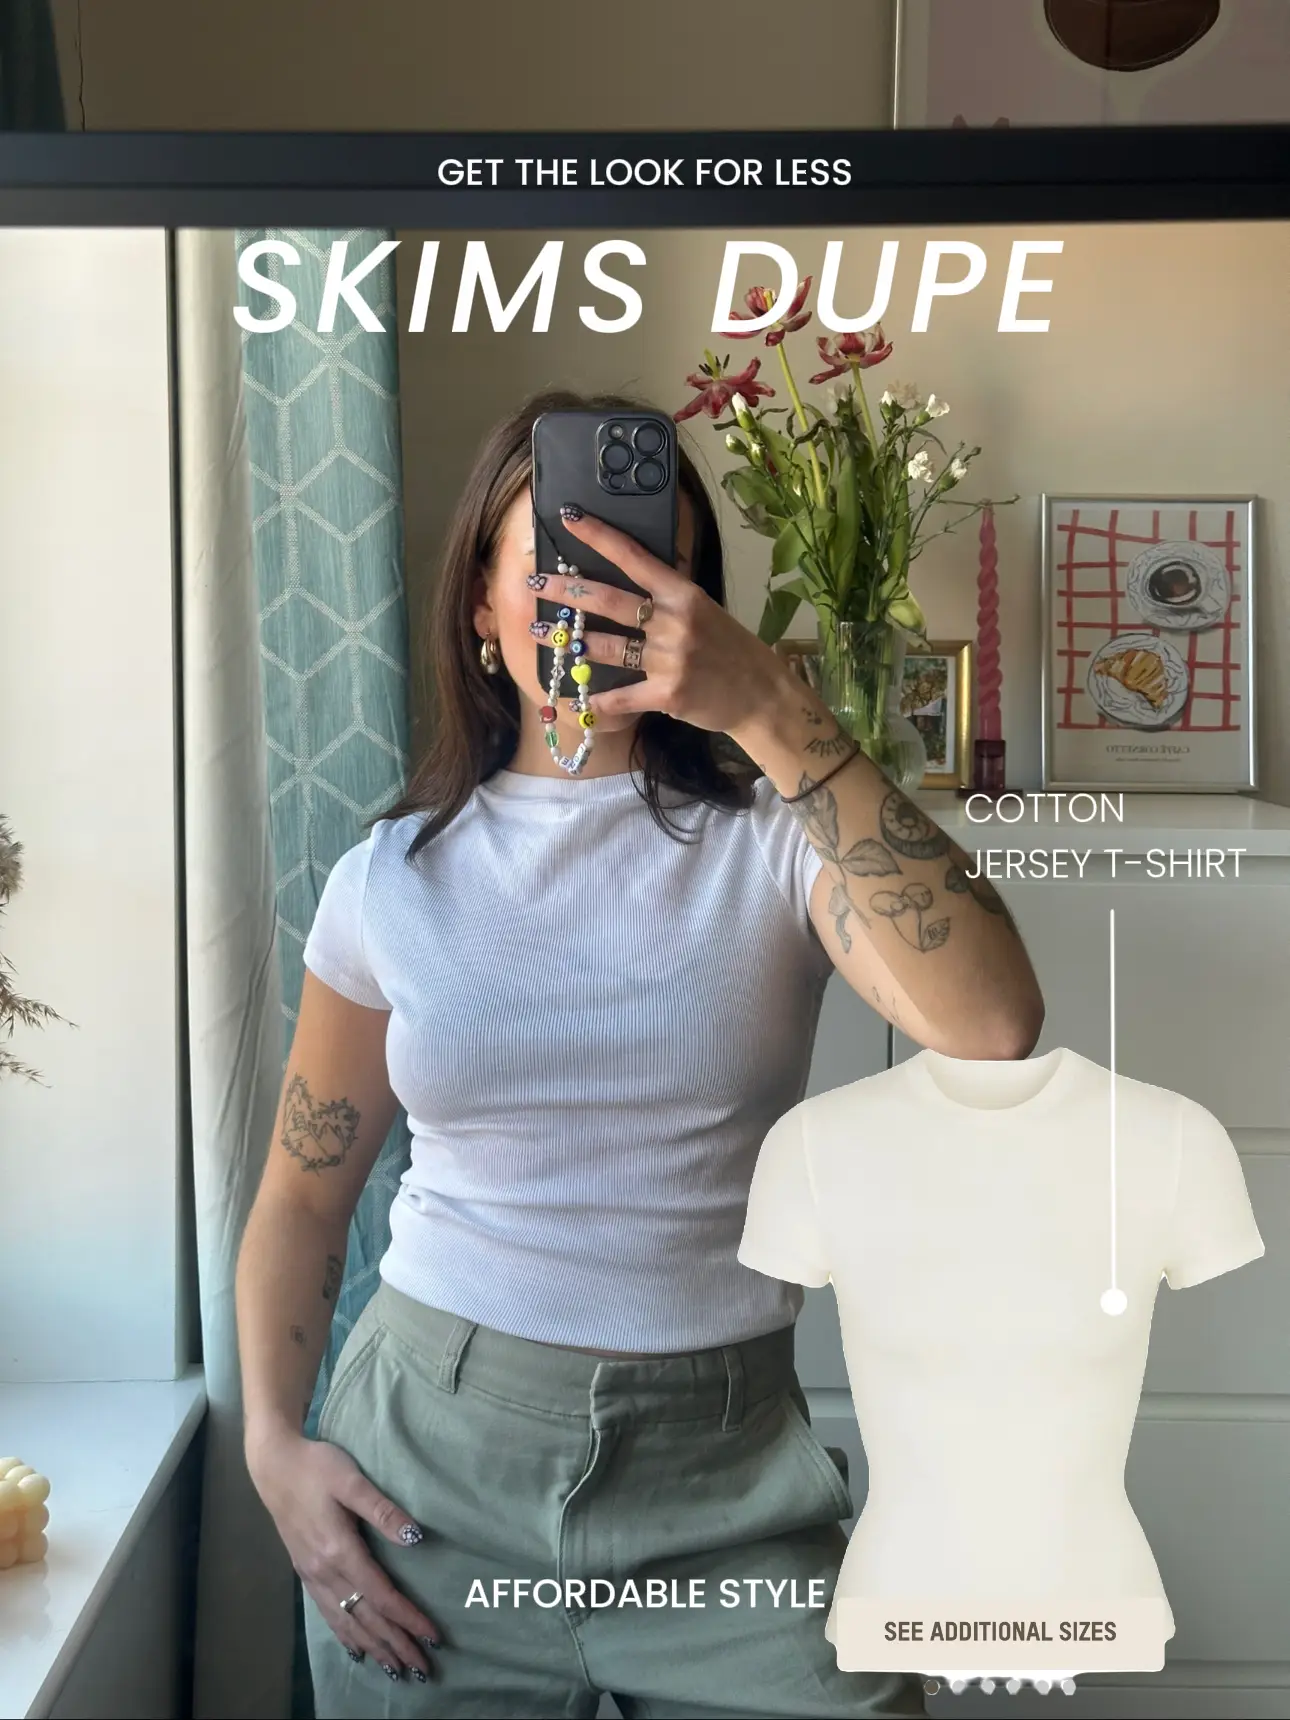 I'm midsize – my Skims dupes from  are half the price and